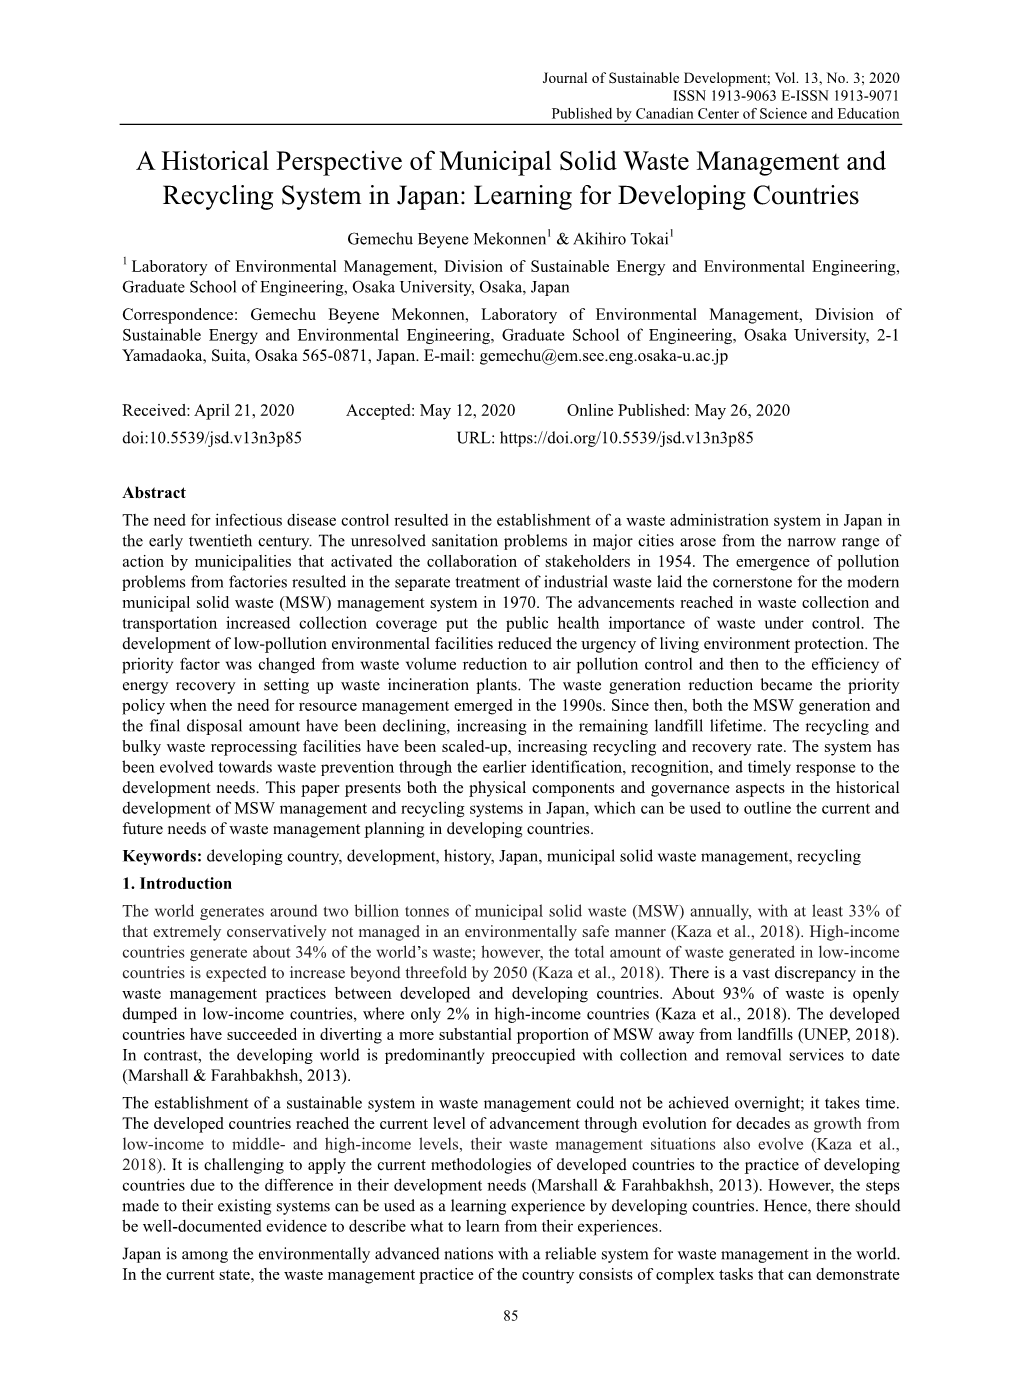 A Historical Perspective of Municipal Solid Waste Management and Recycling System in Japan: Learning for Developing Countries